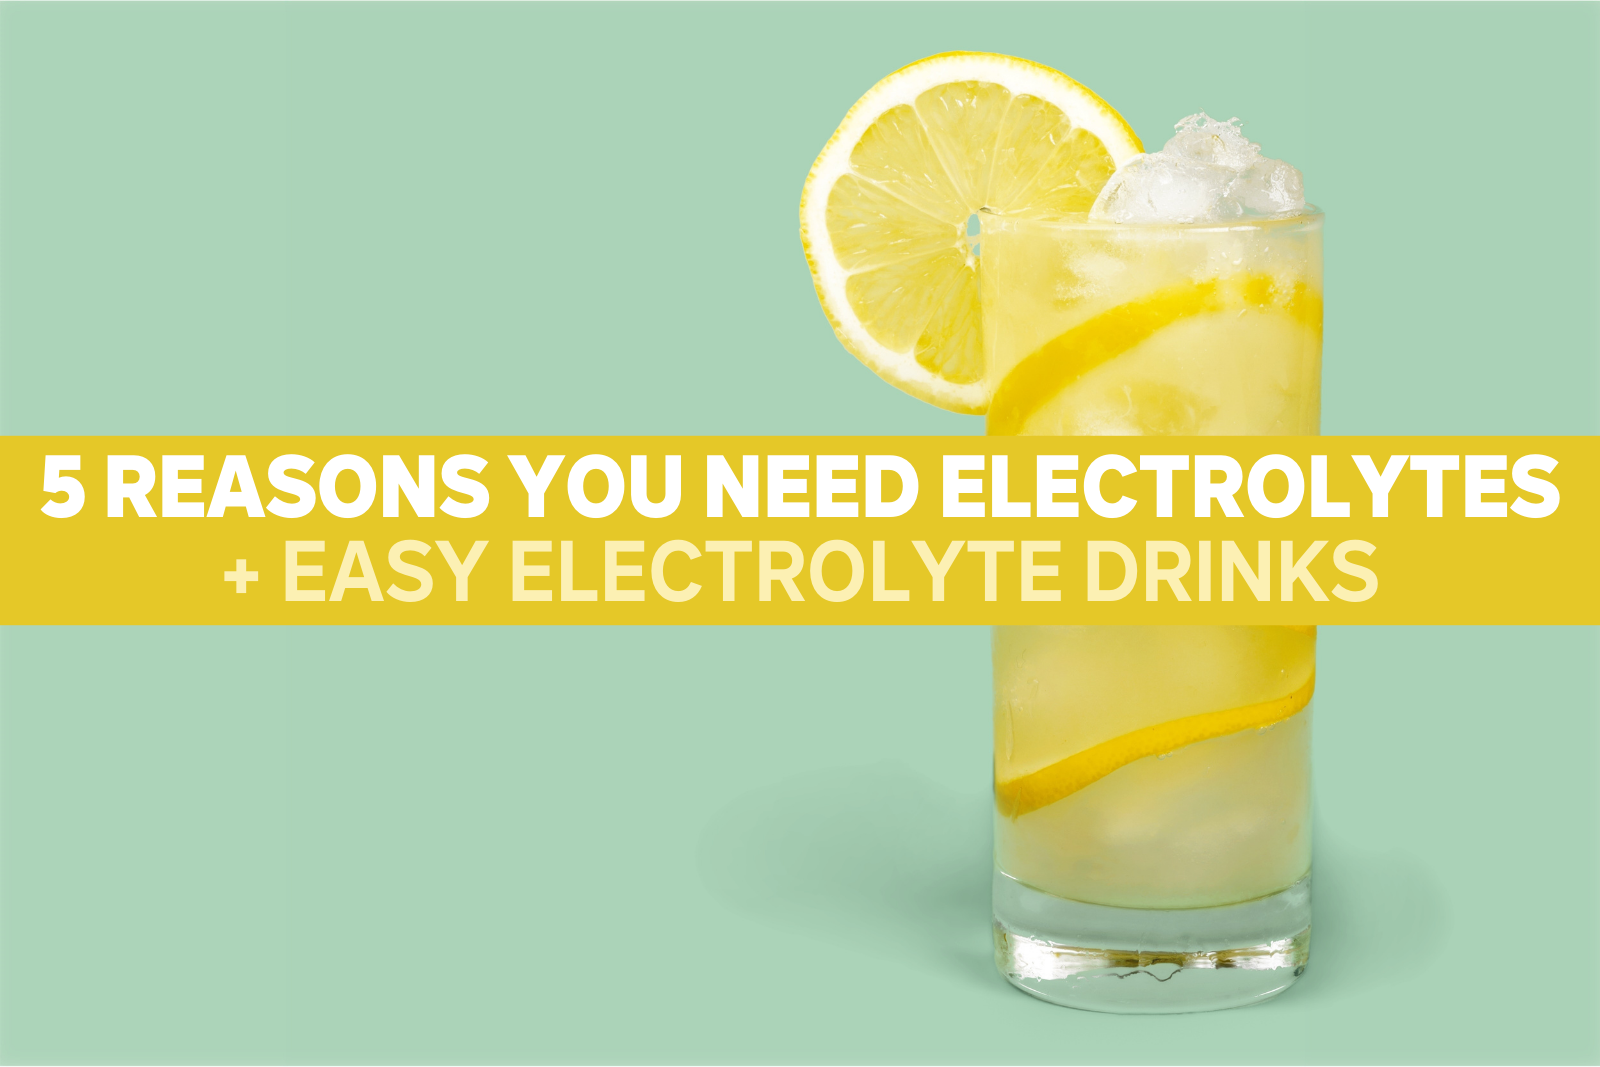 5 Reasons You Need Electrolytes plus Easy Electrolyte Drinks_Blog Cover